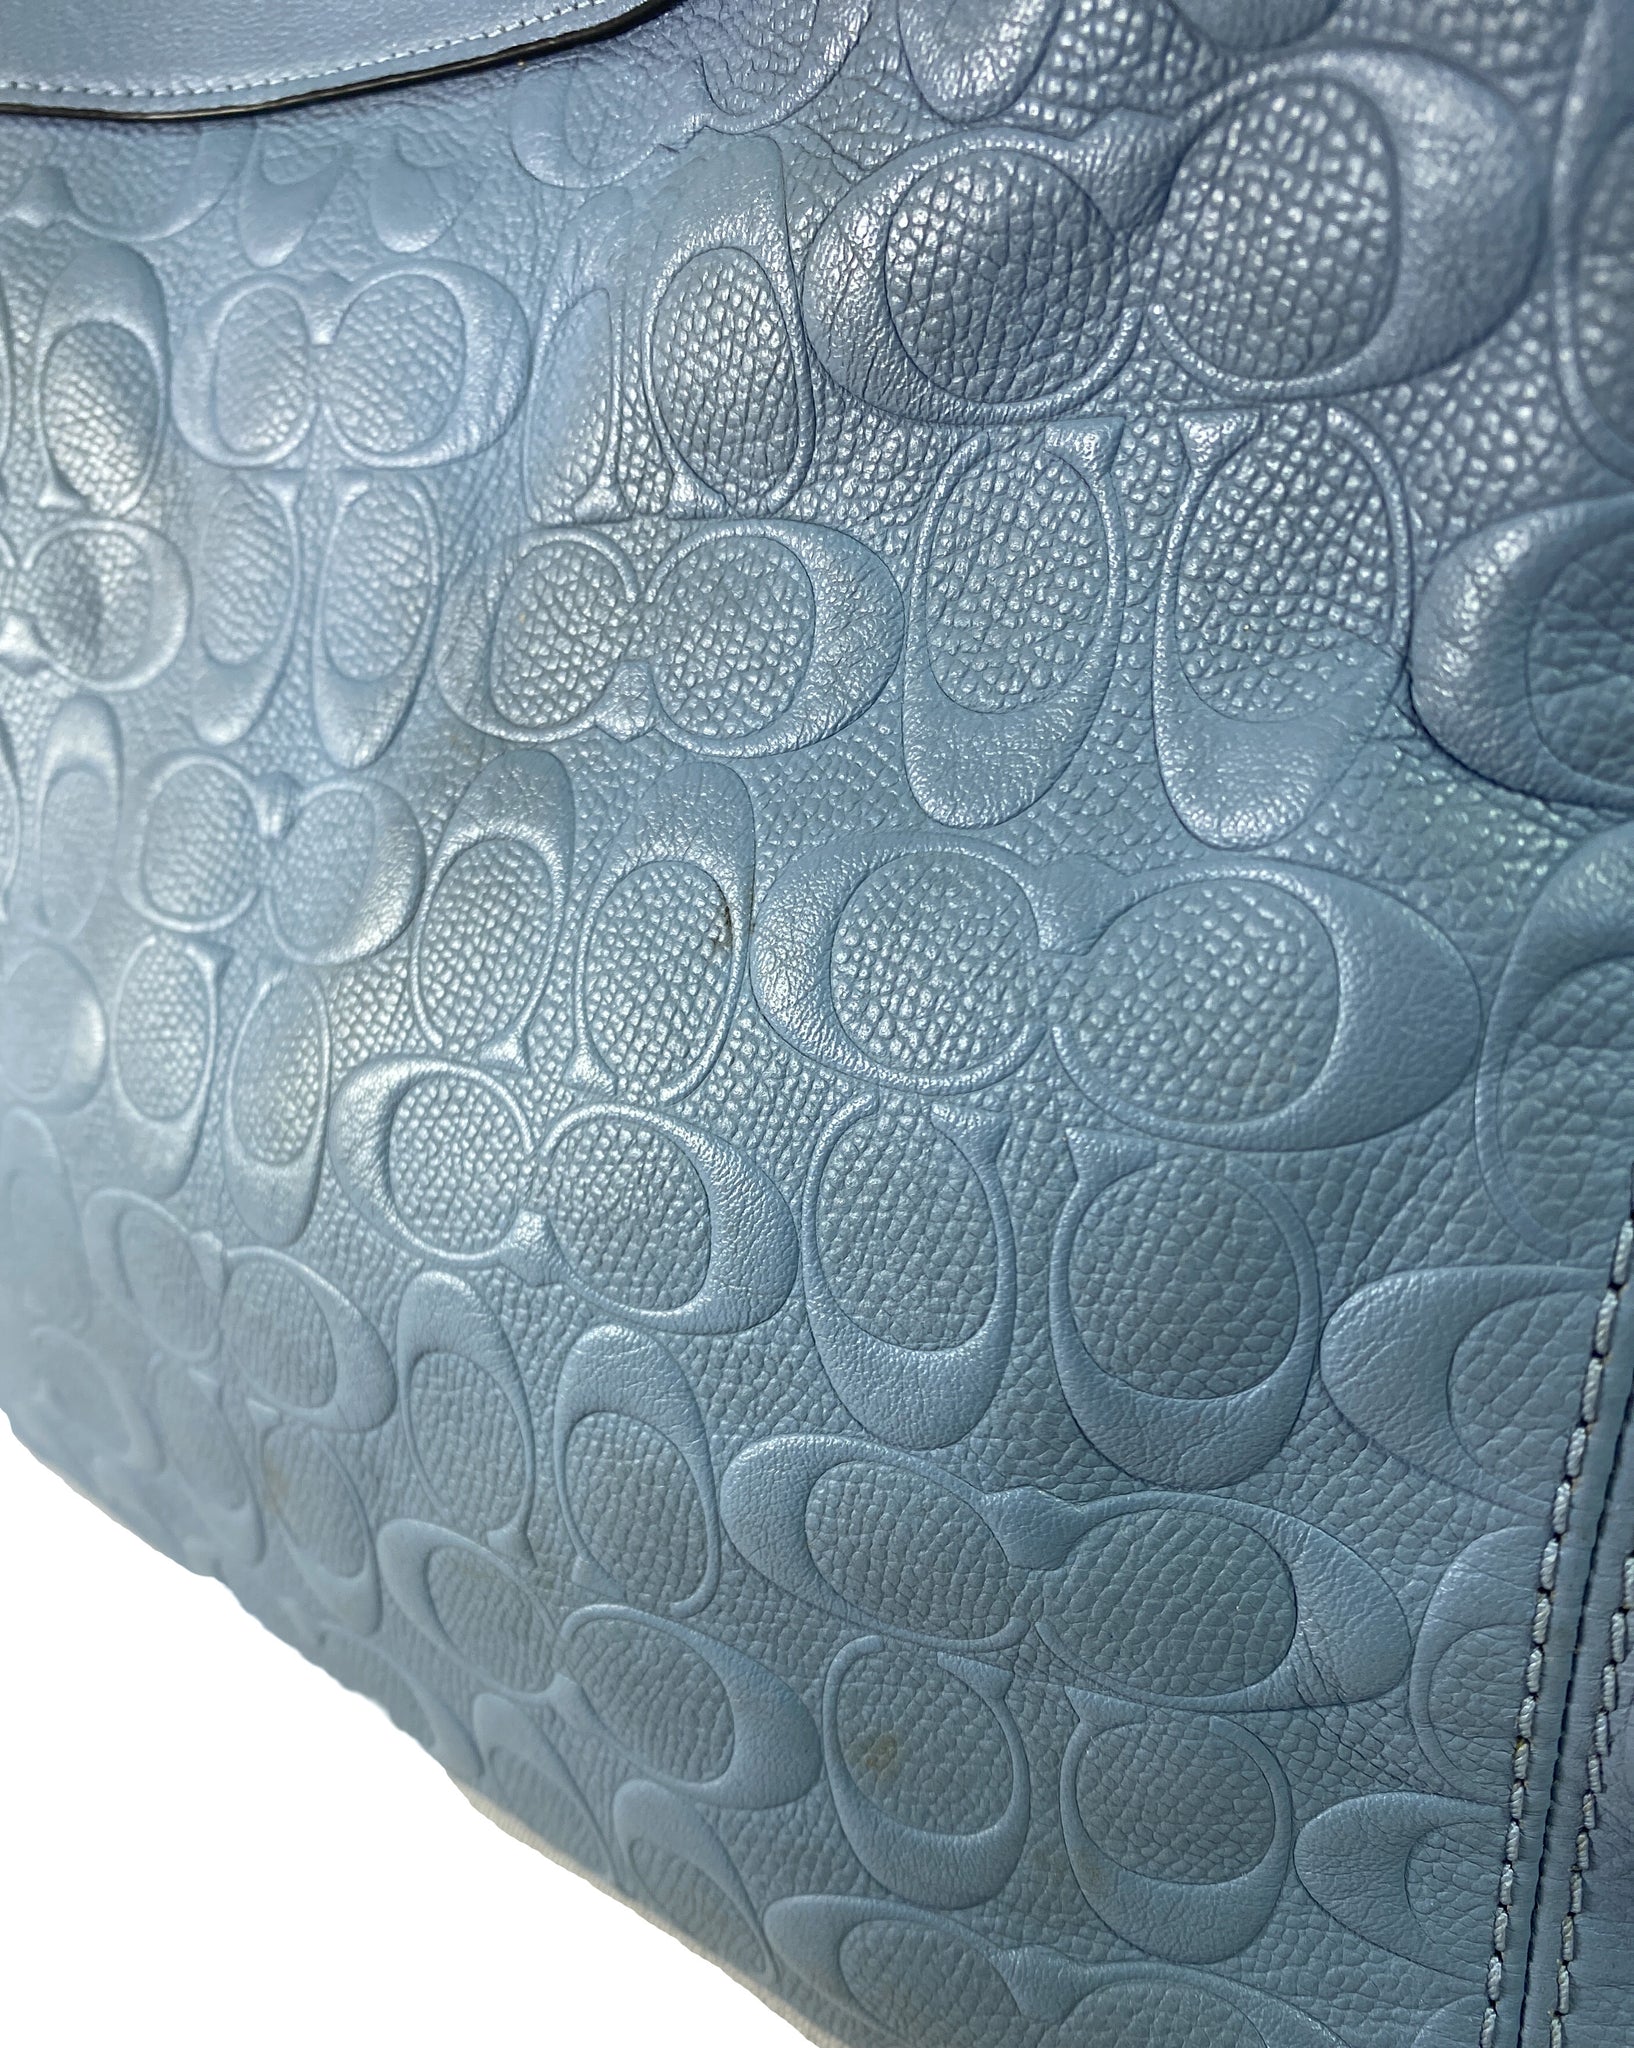 Coach blue leather embossed signature shoulder bag AS IS – My Girlfriend's  Wardrobe LLC